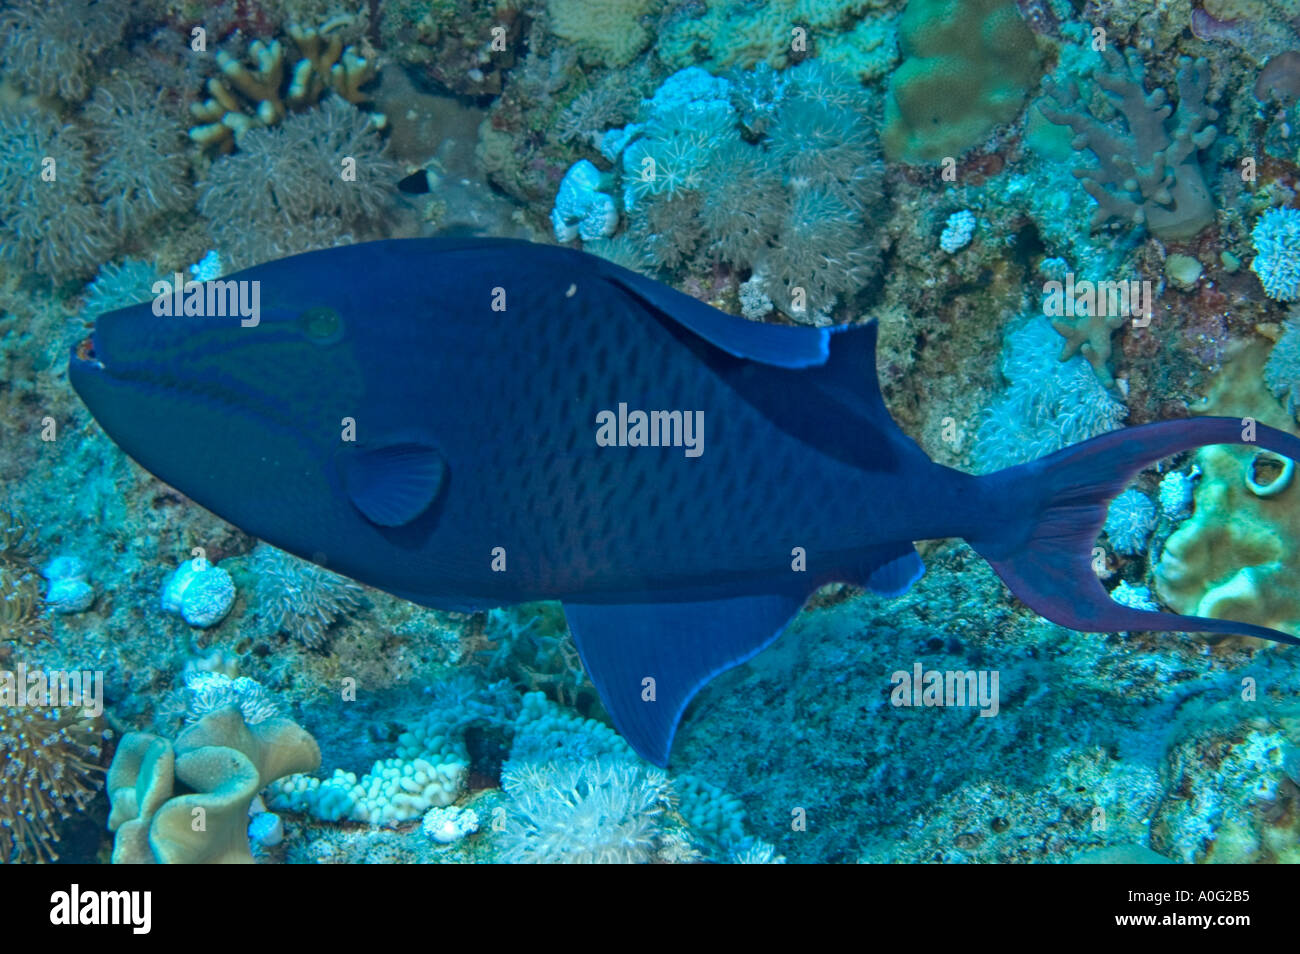 Blue Triggerfish (Pseudobalistes fuscus) in the Southern Red Sea, Egypt Stock Photo